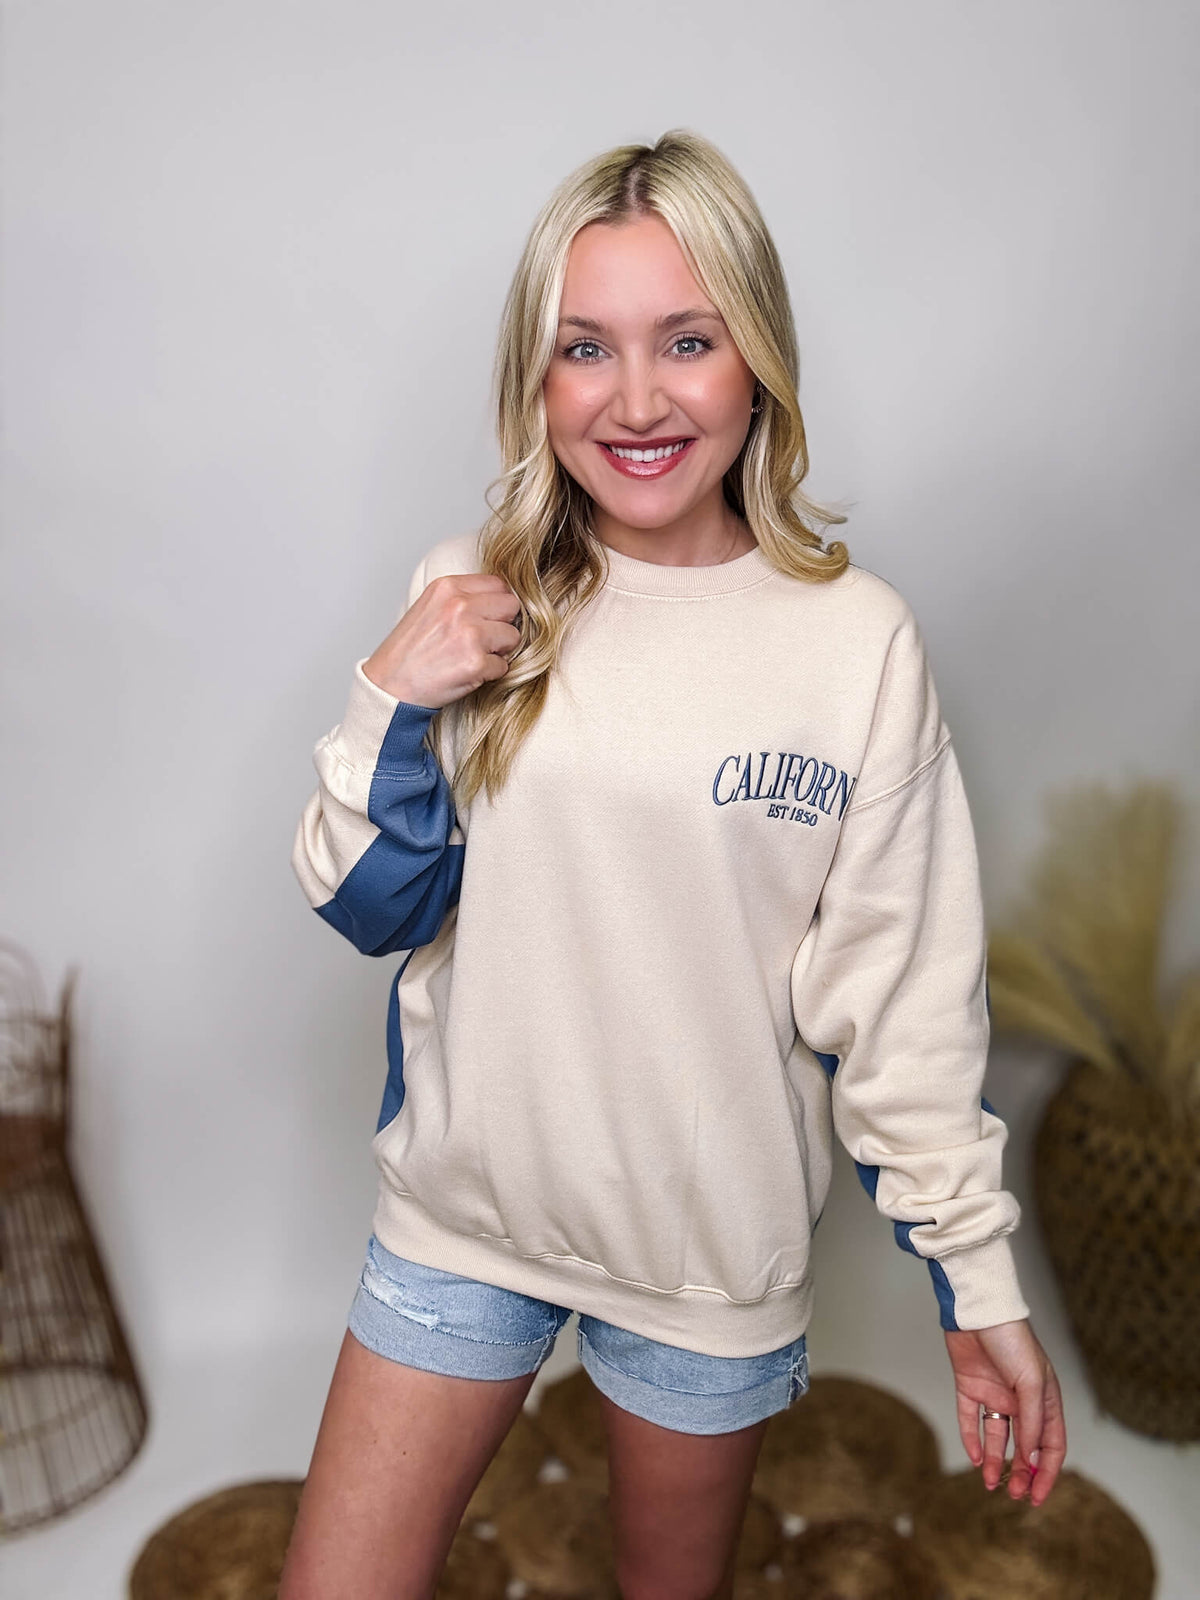 ReflexTwo Tone Embroidered California Blue and Cream Oversized Pullover